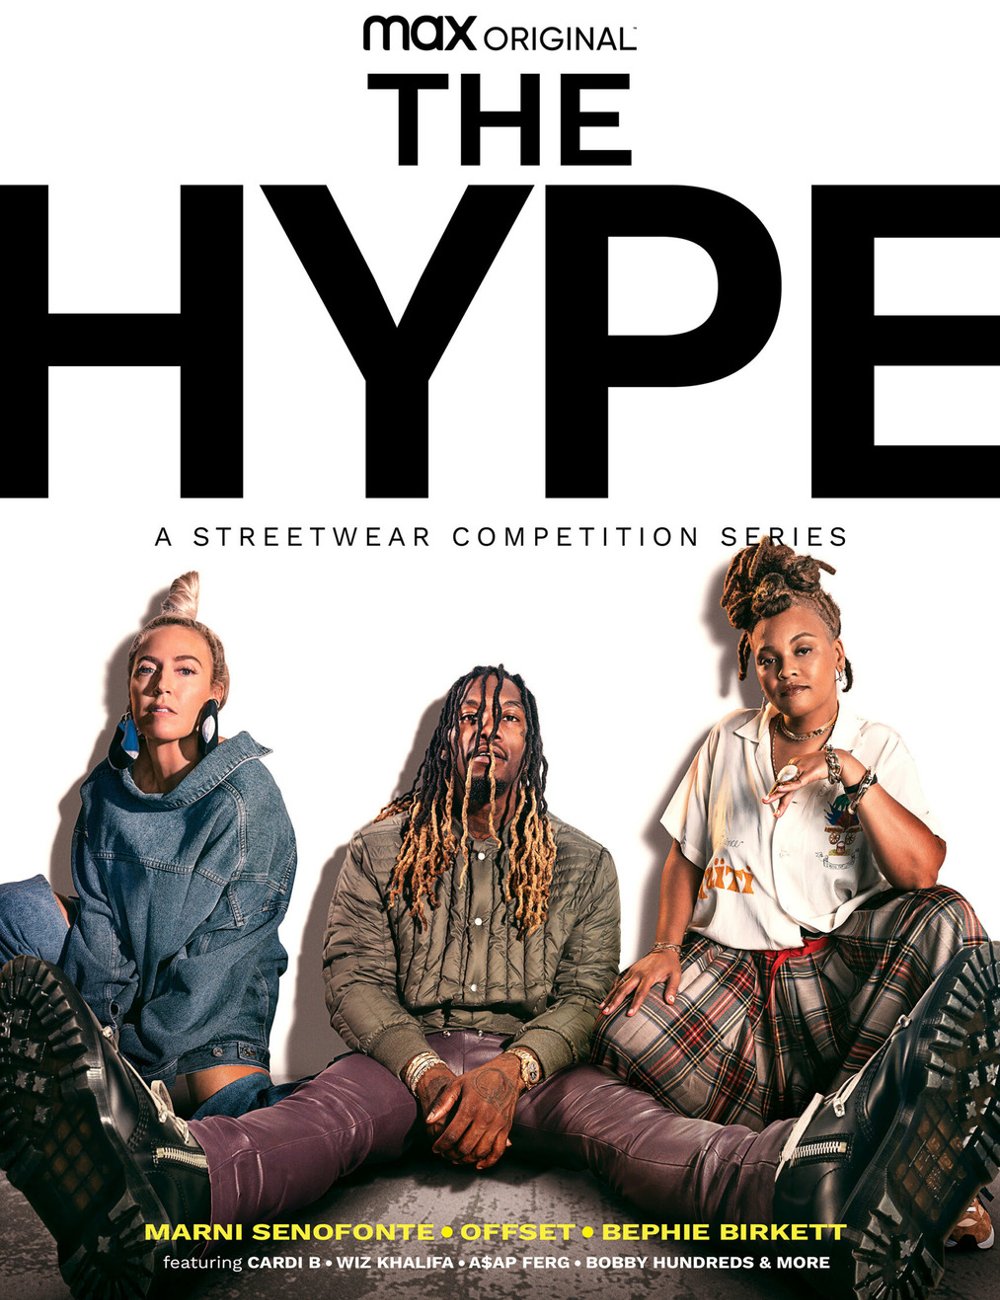 The Hype - reality shows de moda - reality shows de moda - reality shows de moda - reality shows de moda - https://stealthelook.com.br